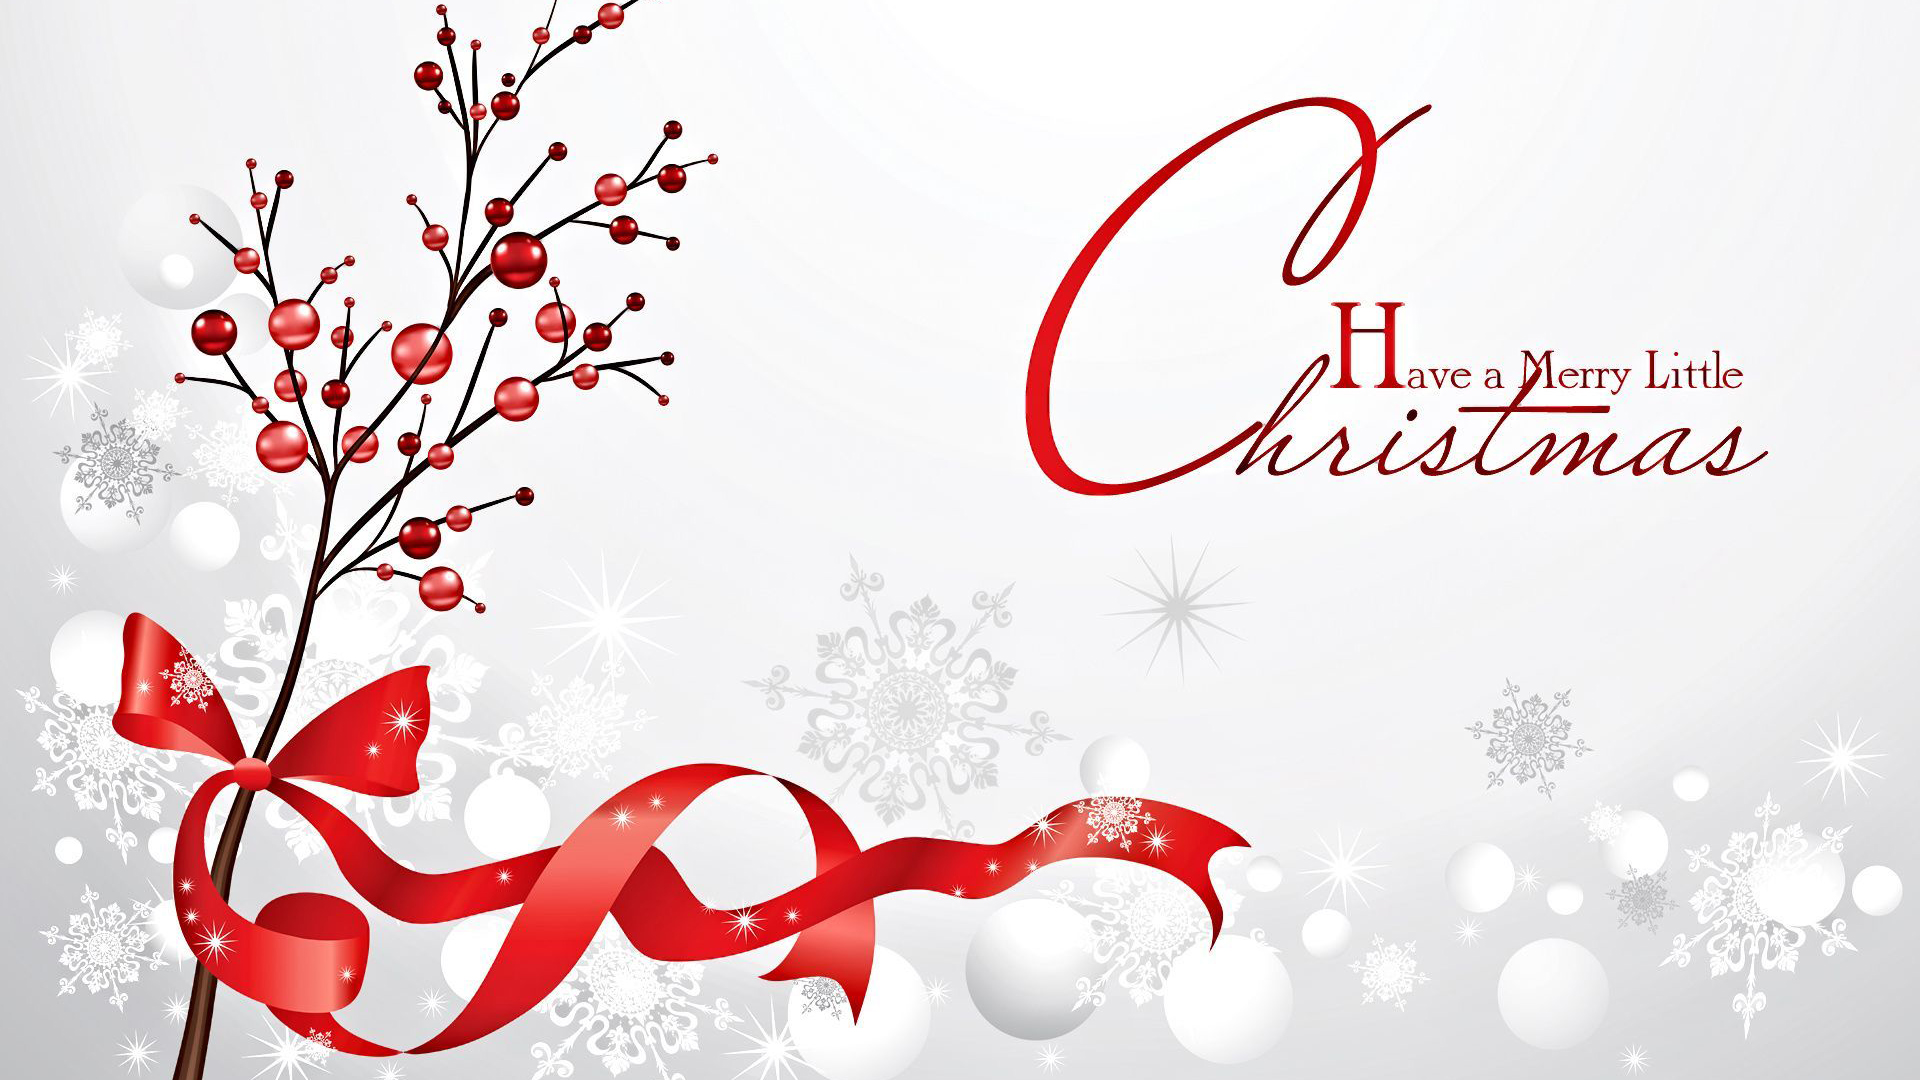 Have A Merry Little Christmas HD Christmas Wallpapers Desktop Wallpapers.